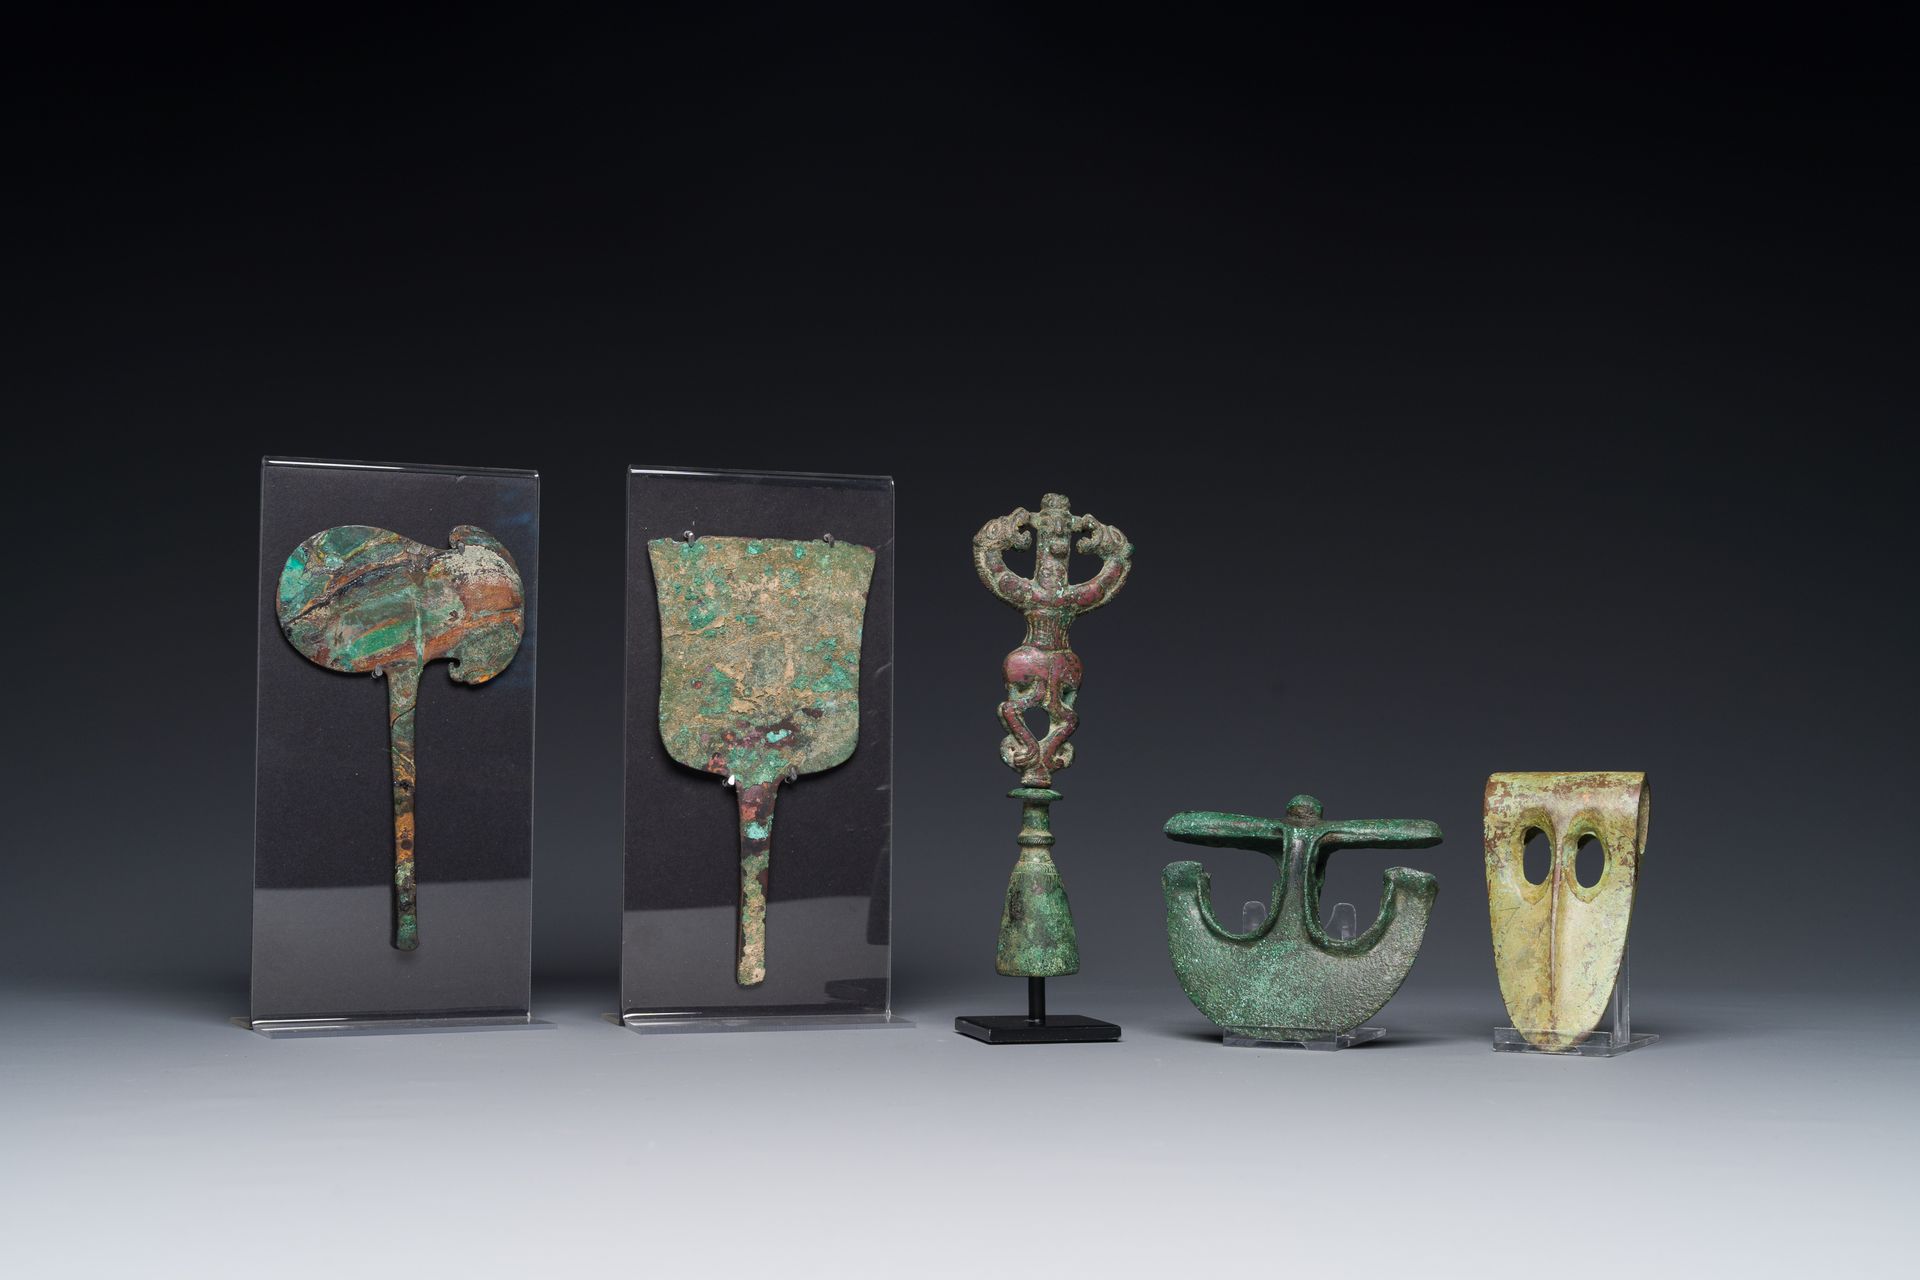 A collection of three bronze axes, a mirror and an anthropomorphic idol with two&hellip;